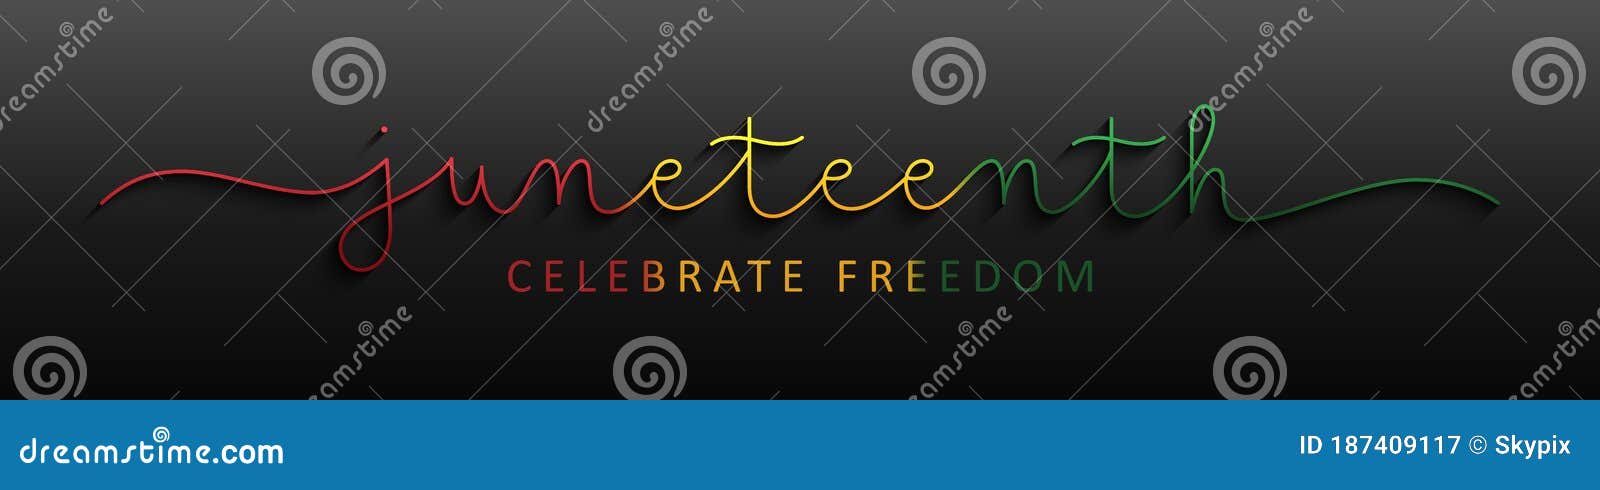 juneteenth colorful monoline calligraphy banner